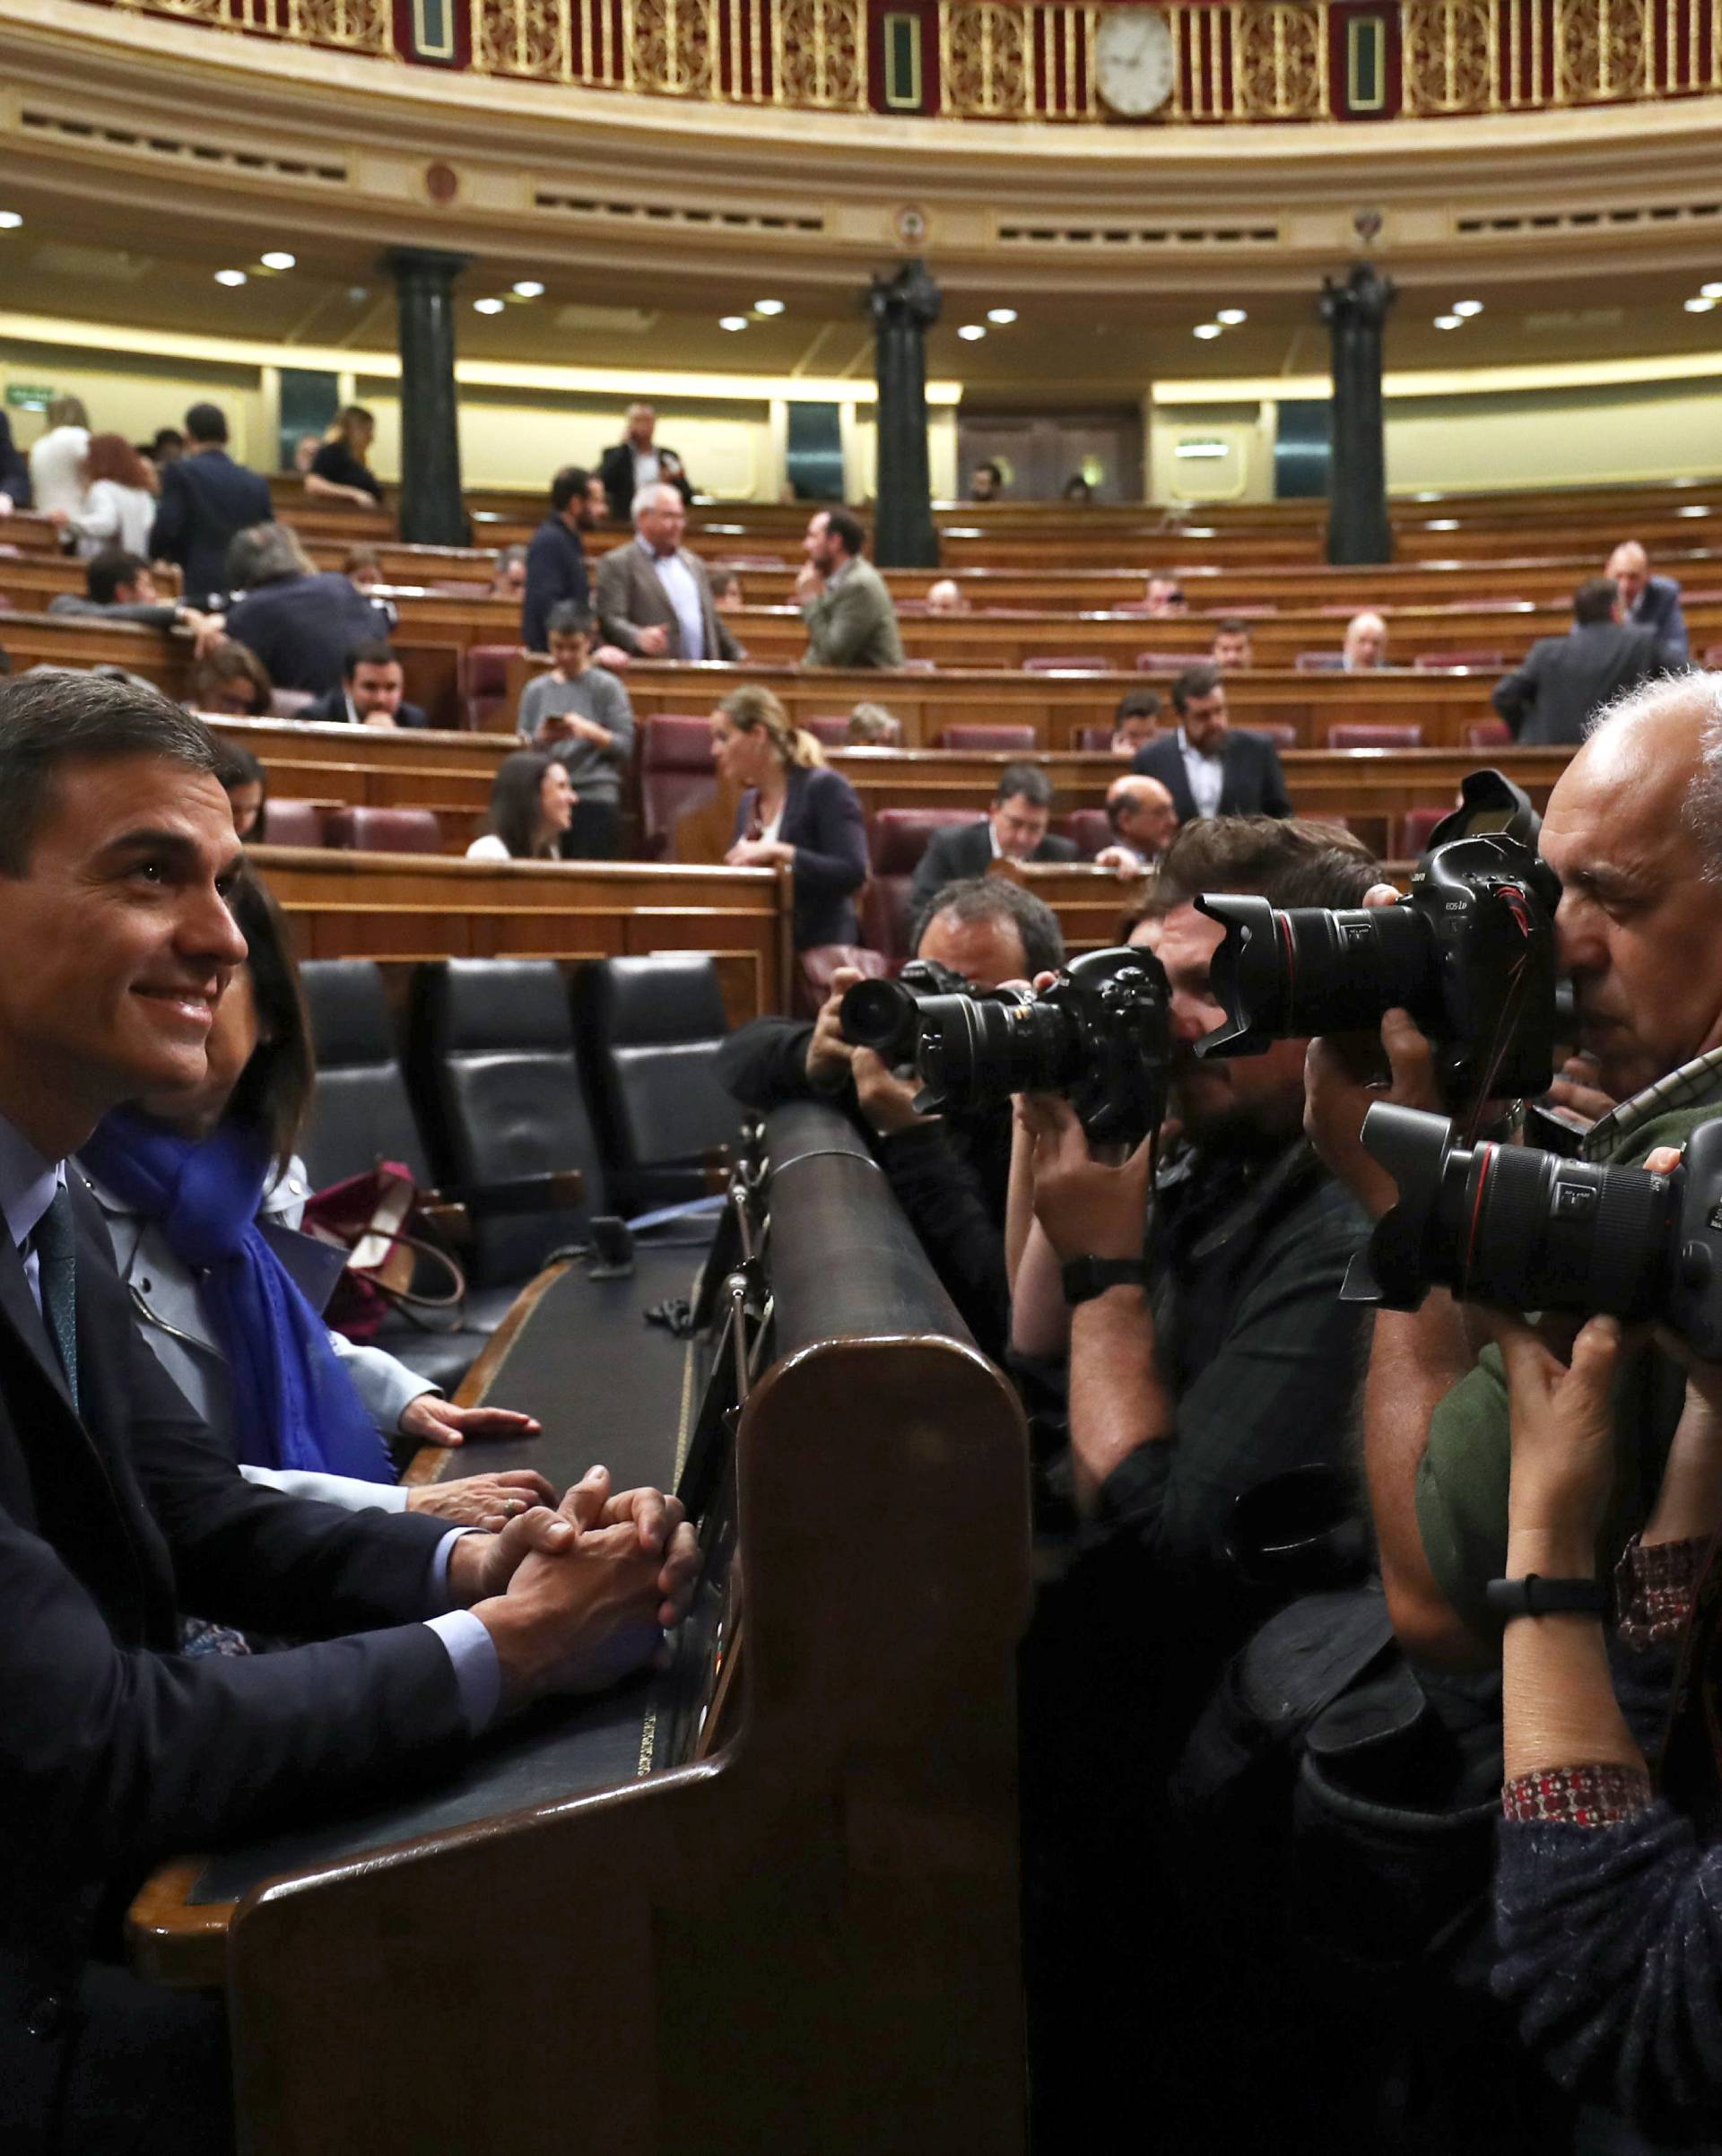 Spain's Prime Minister Pedro Sanchez attends a session at Parliament in Madrid